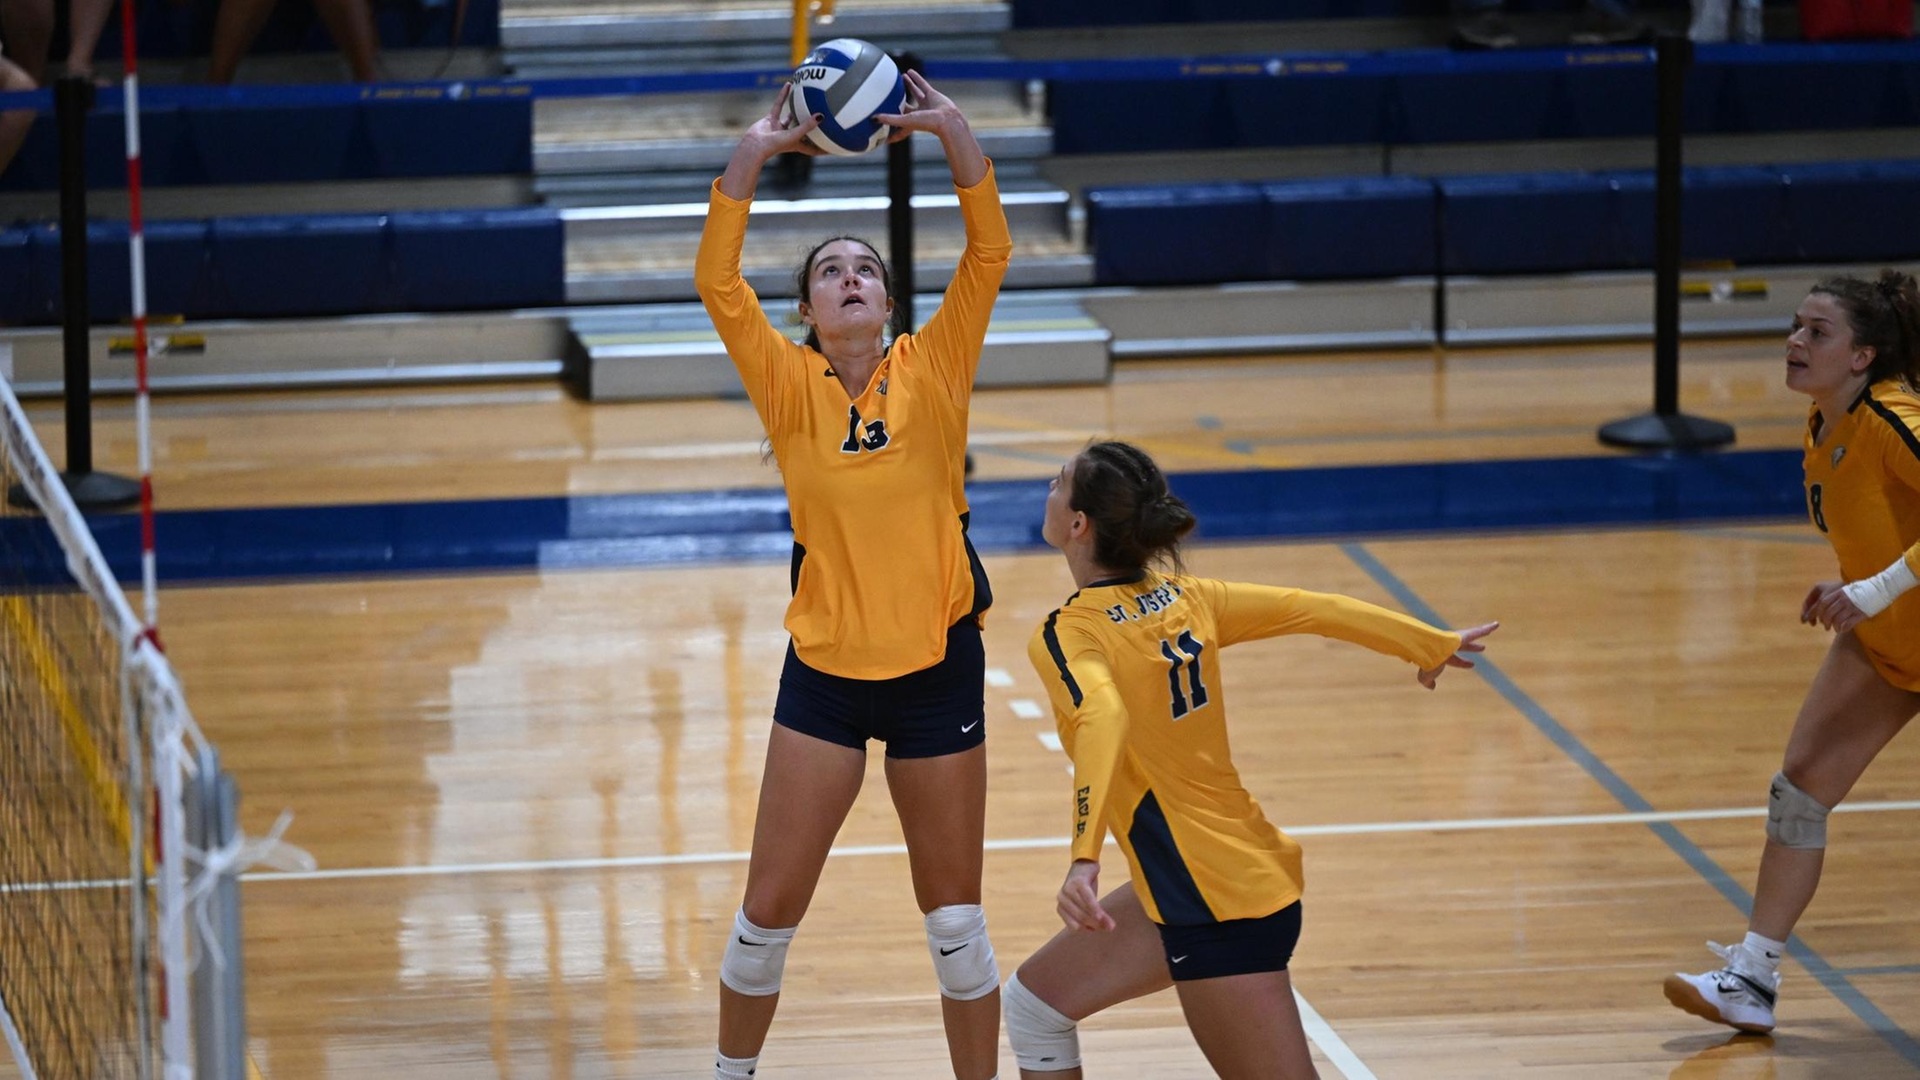 Women's Volleyball Splits a Pair on Saturday